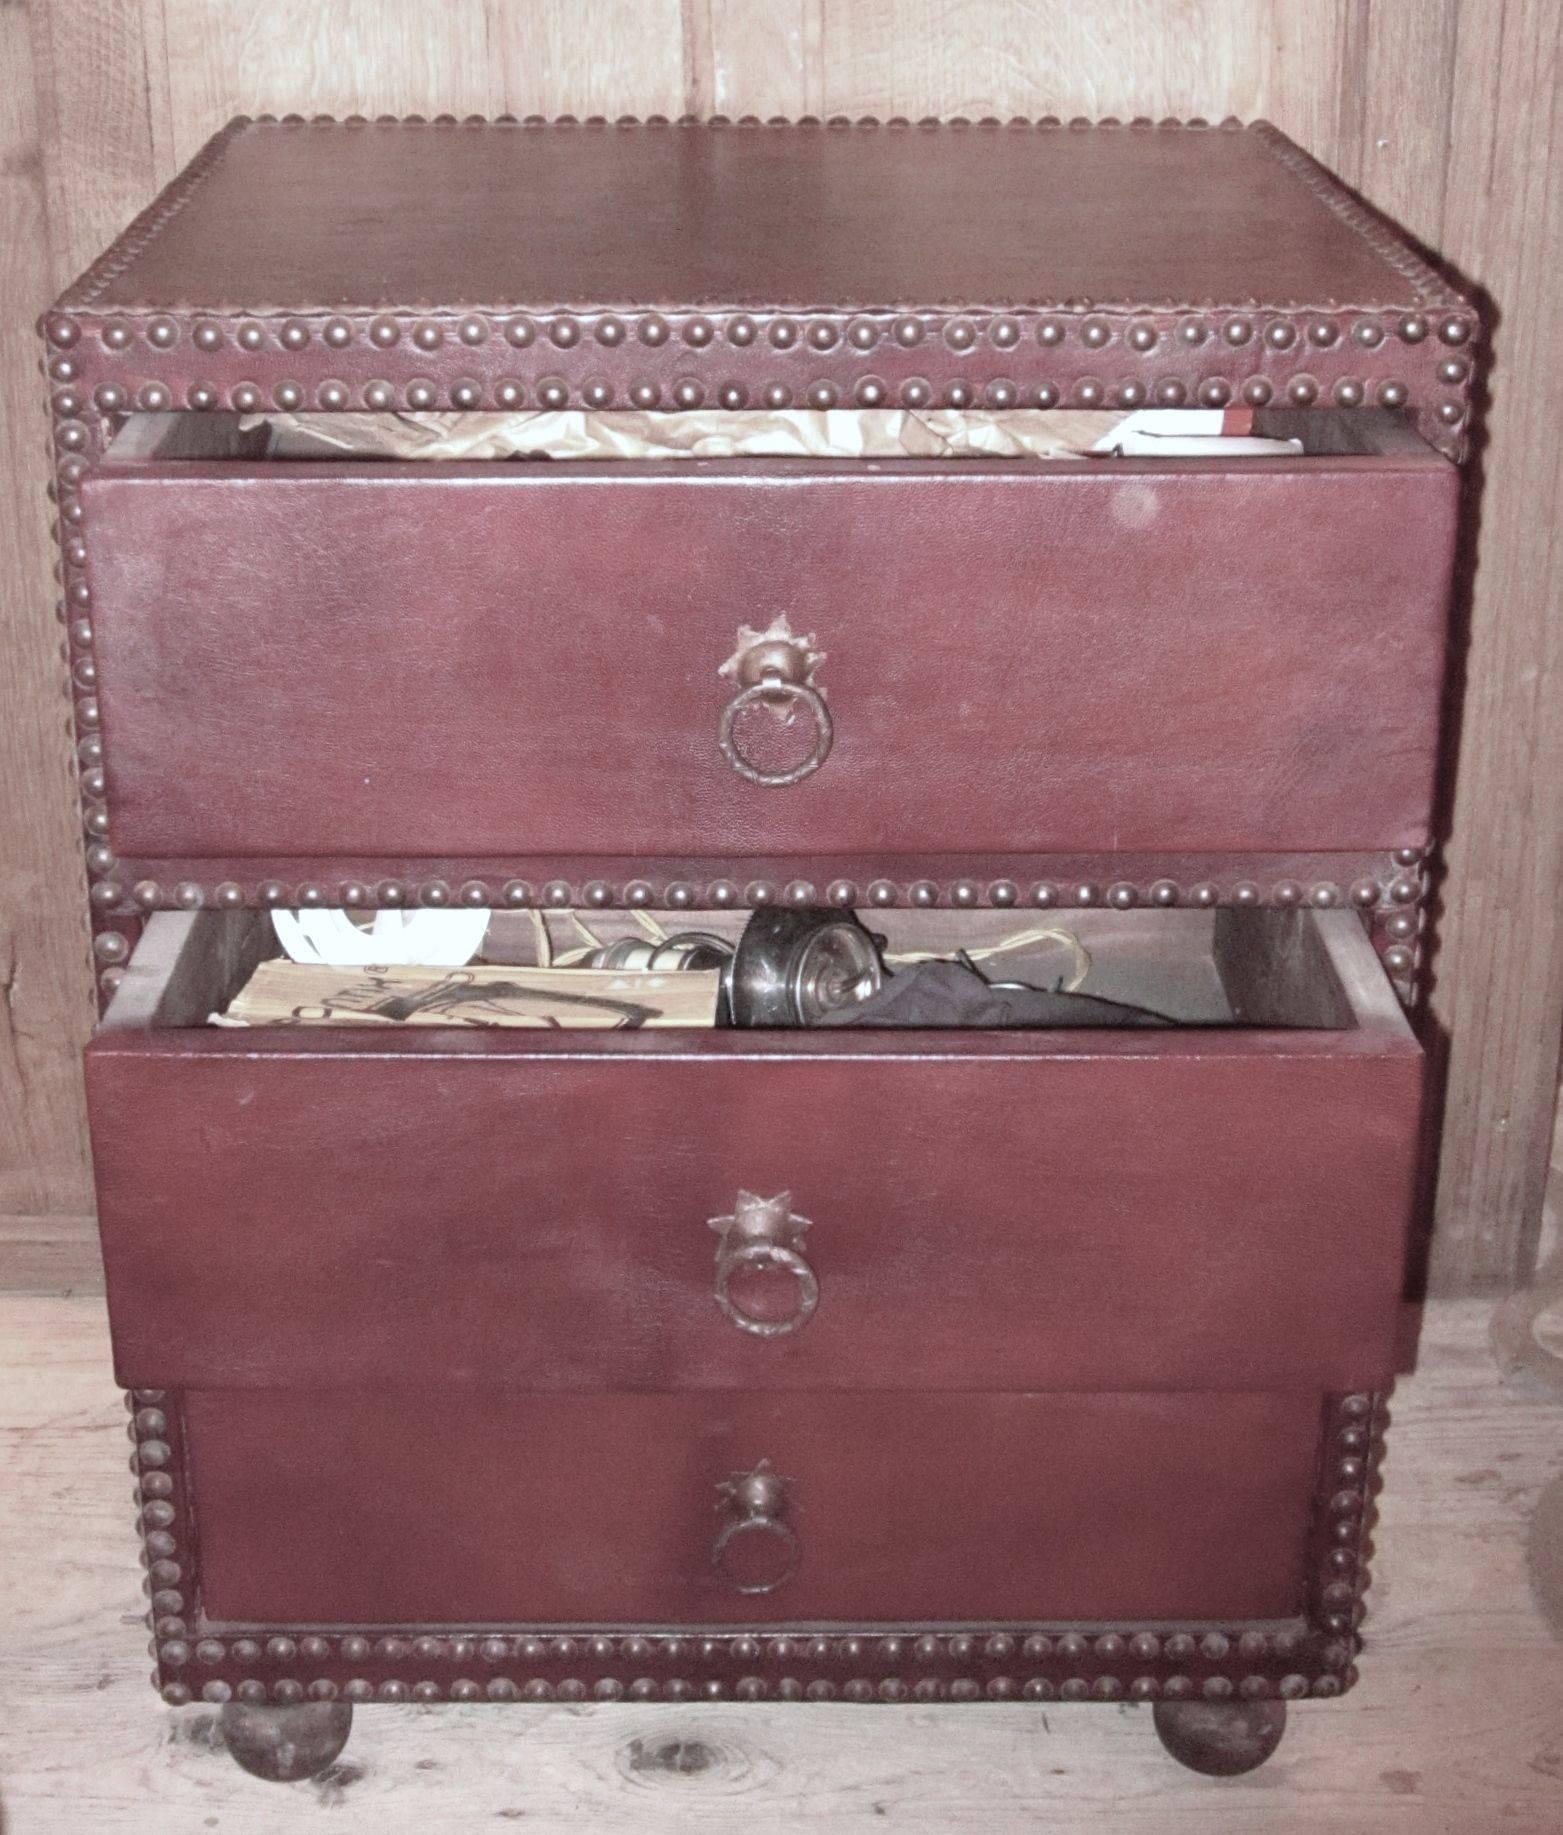 1960s Spanish cordovan leather three-drawer chest or nightstand.
The chest has nailhead accents around the frame and drawers, with brass drawer pulls.
Excellent condition.
 